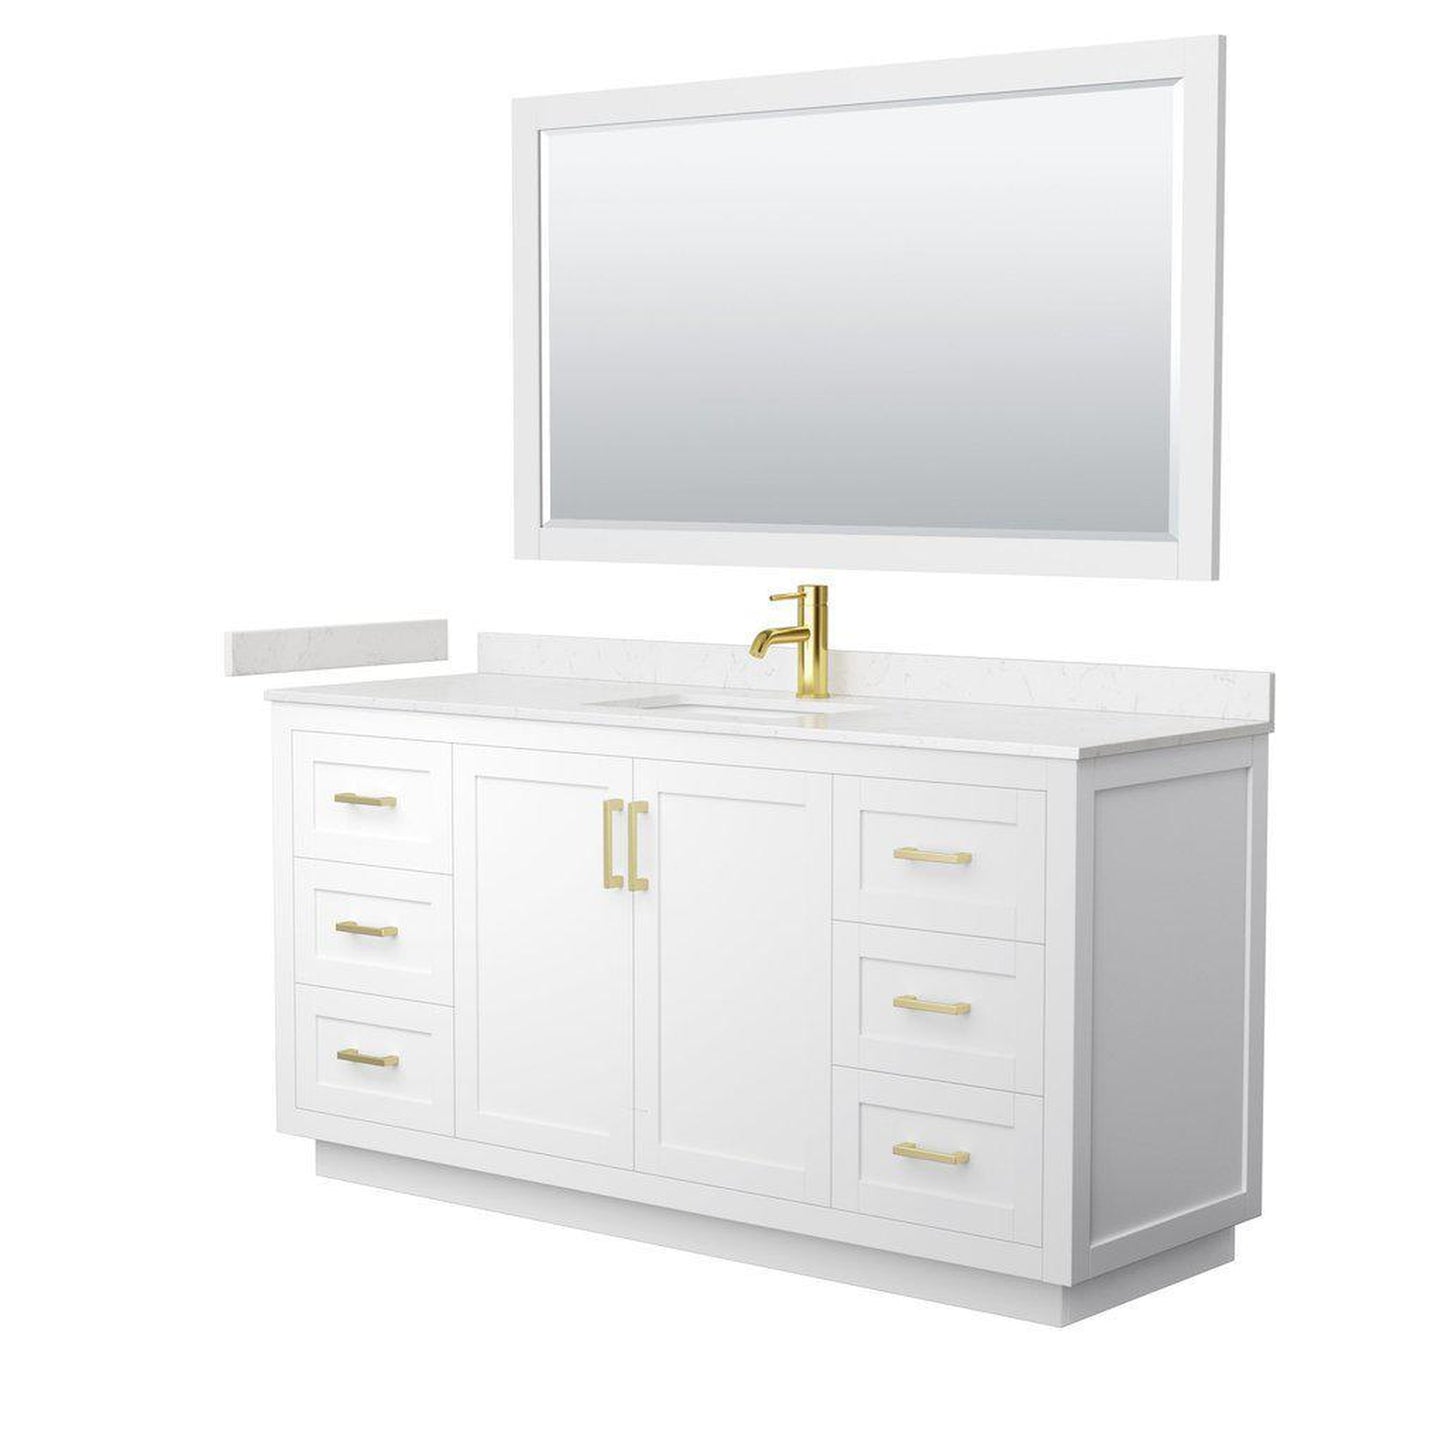 Wyndham Collection Miranda 66" Single Bathroom White Vanity Set With Light-Vein Carrara Cultured Marble Countertop, Undermount Square Sink, 58" Mirror And Brushed Gold Trim